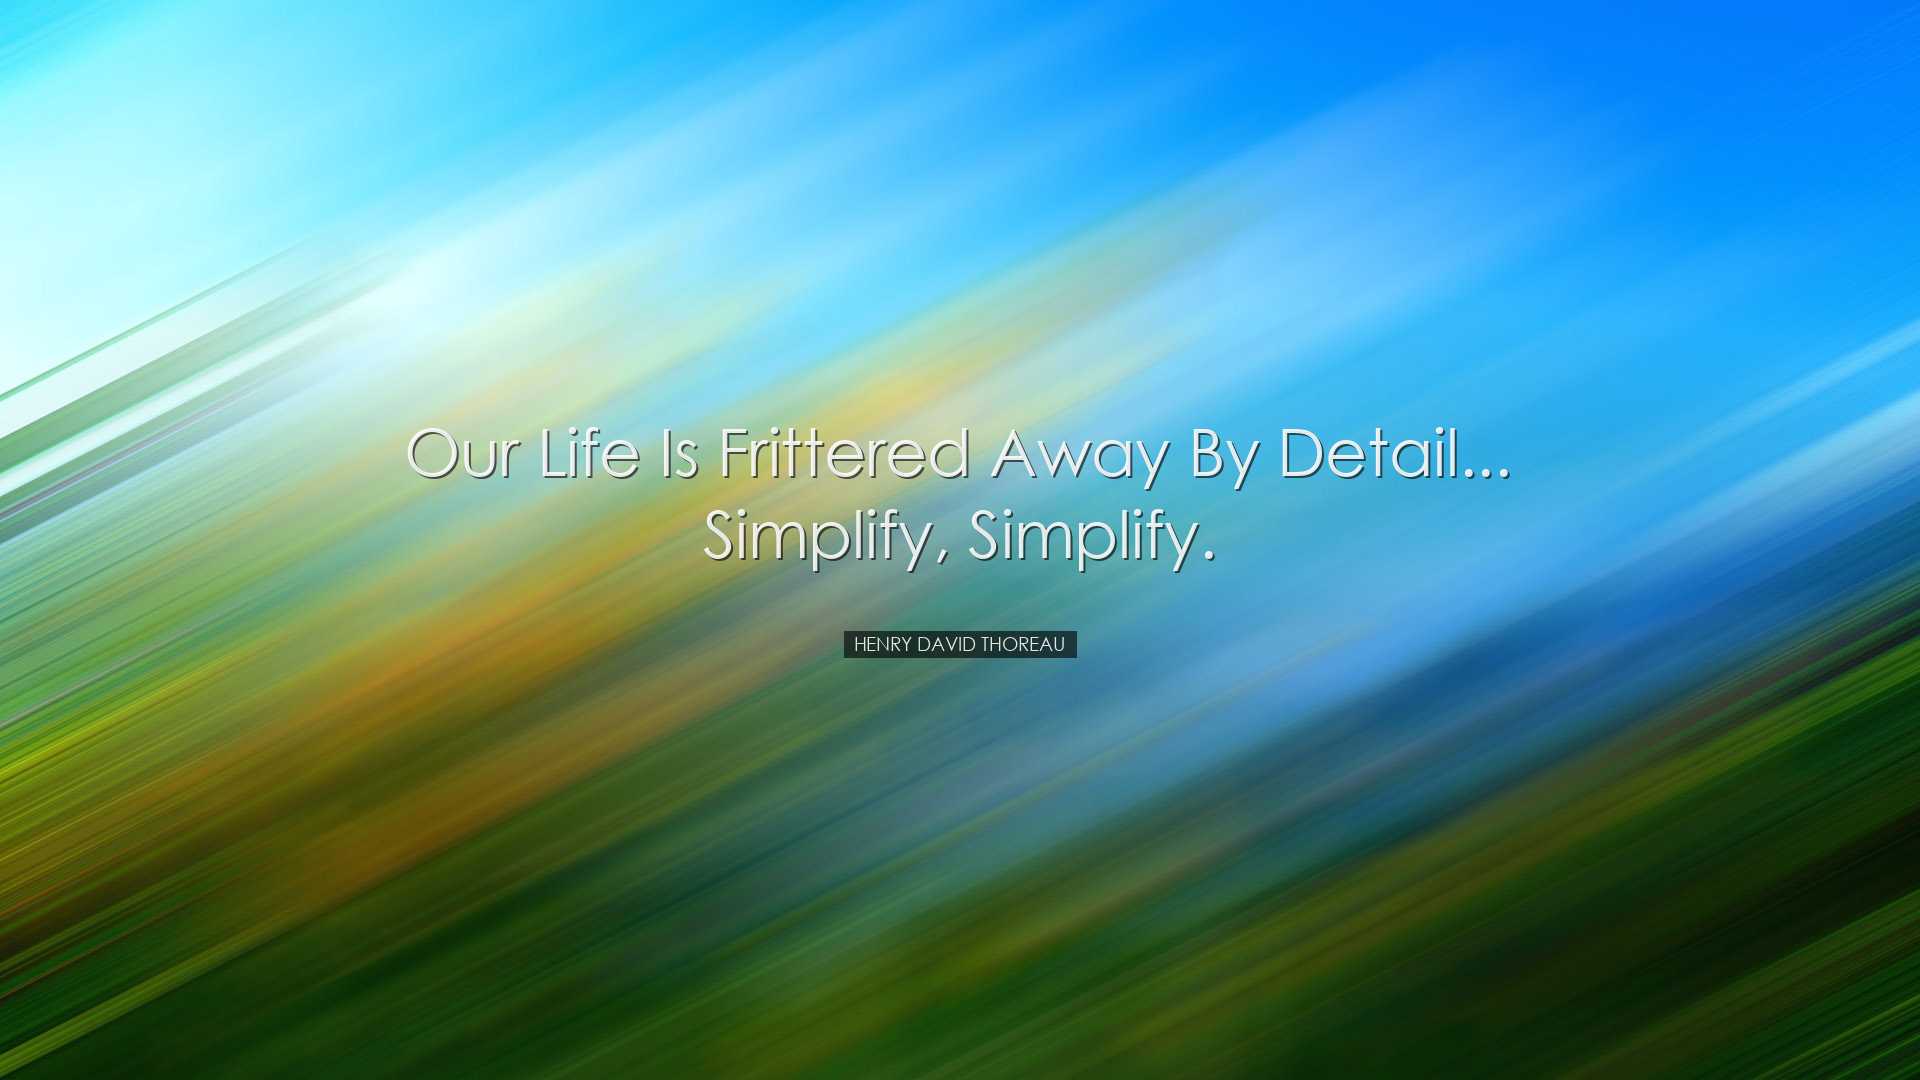 Our life is frittered away by detail... simplify, simplify. - Henr